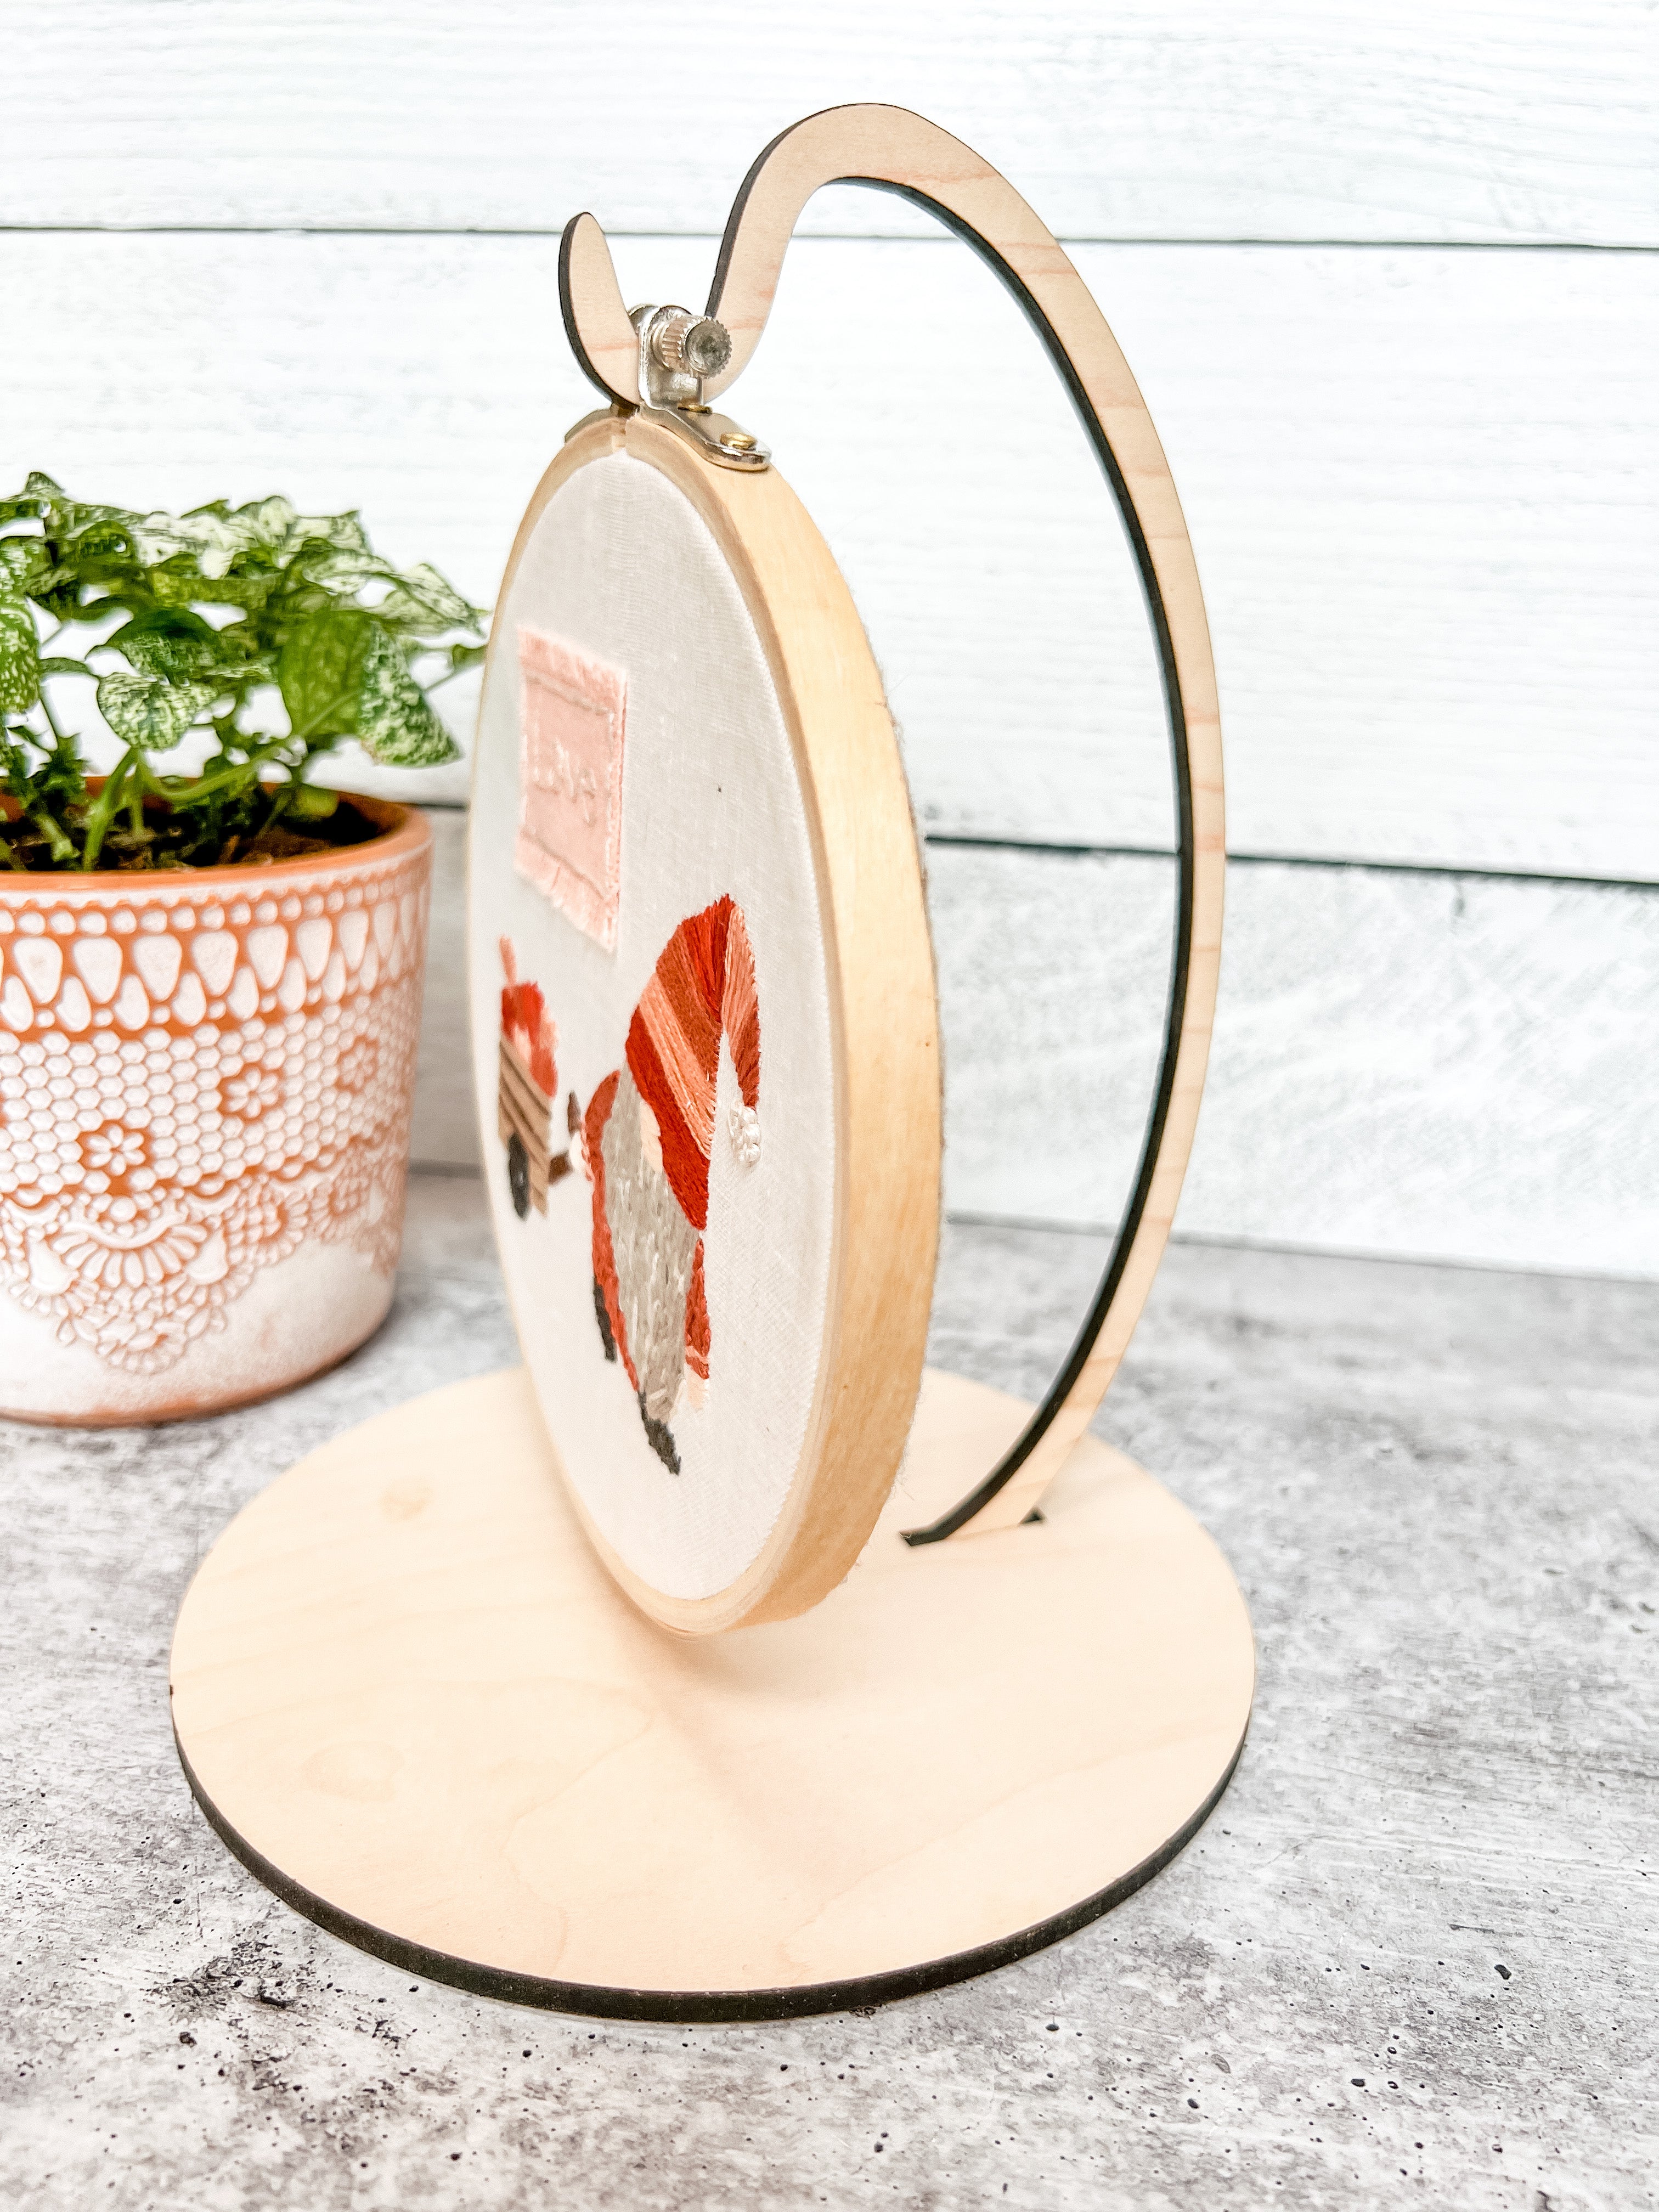 Embroidery Display Hoop Holders - The little Green Bean